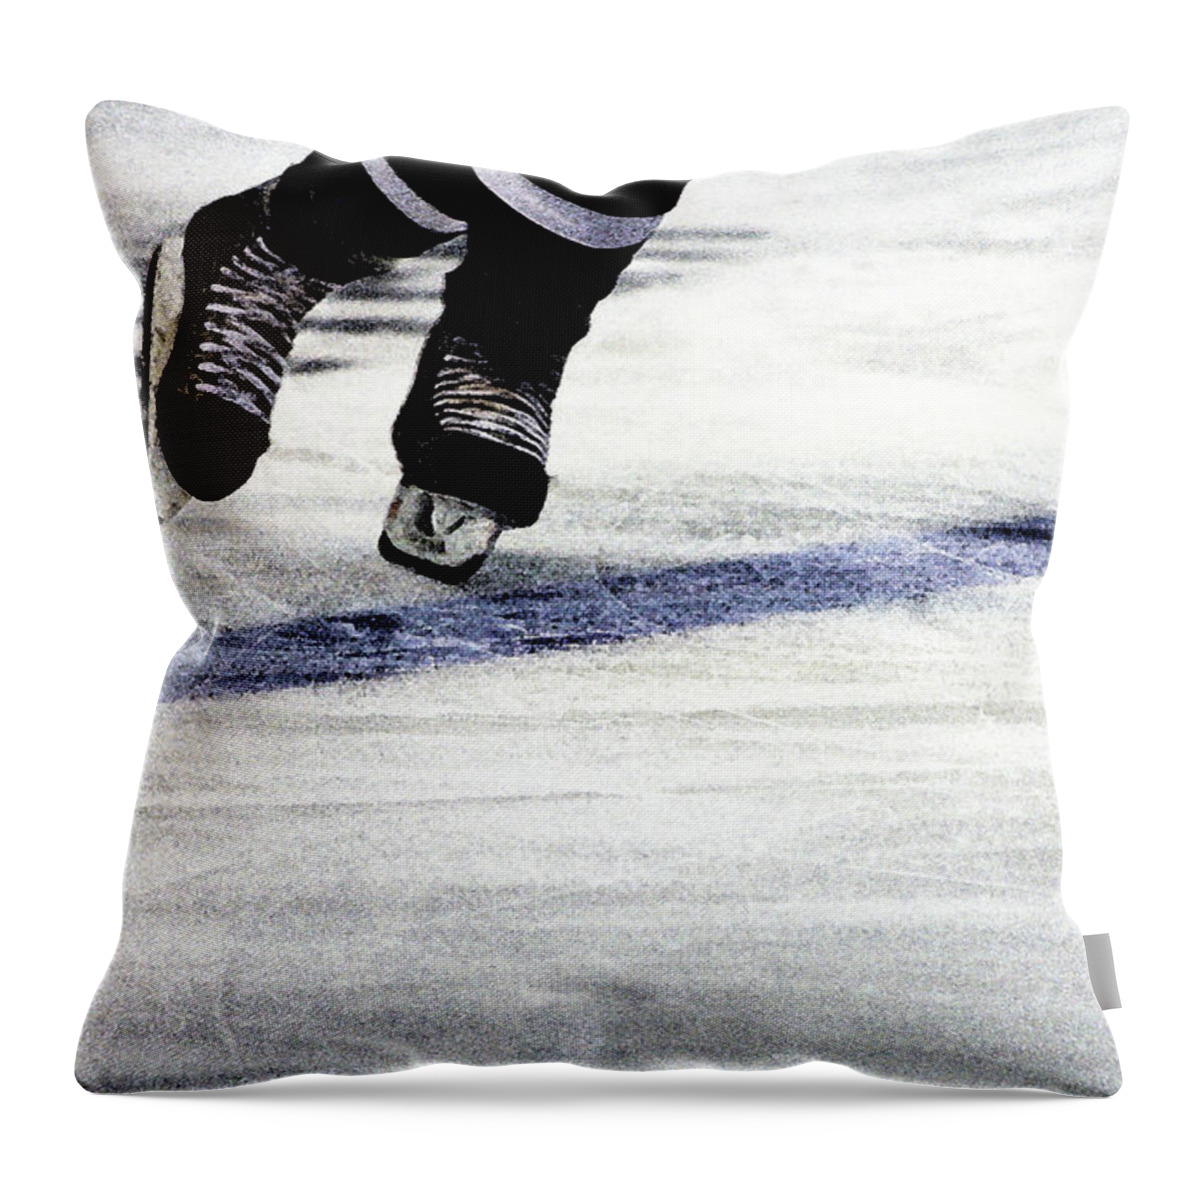 Hockey Throw Pillow featuring the photograph He Skates by Karol Livote